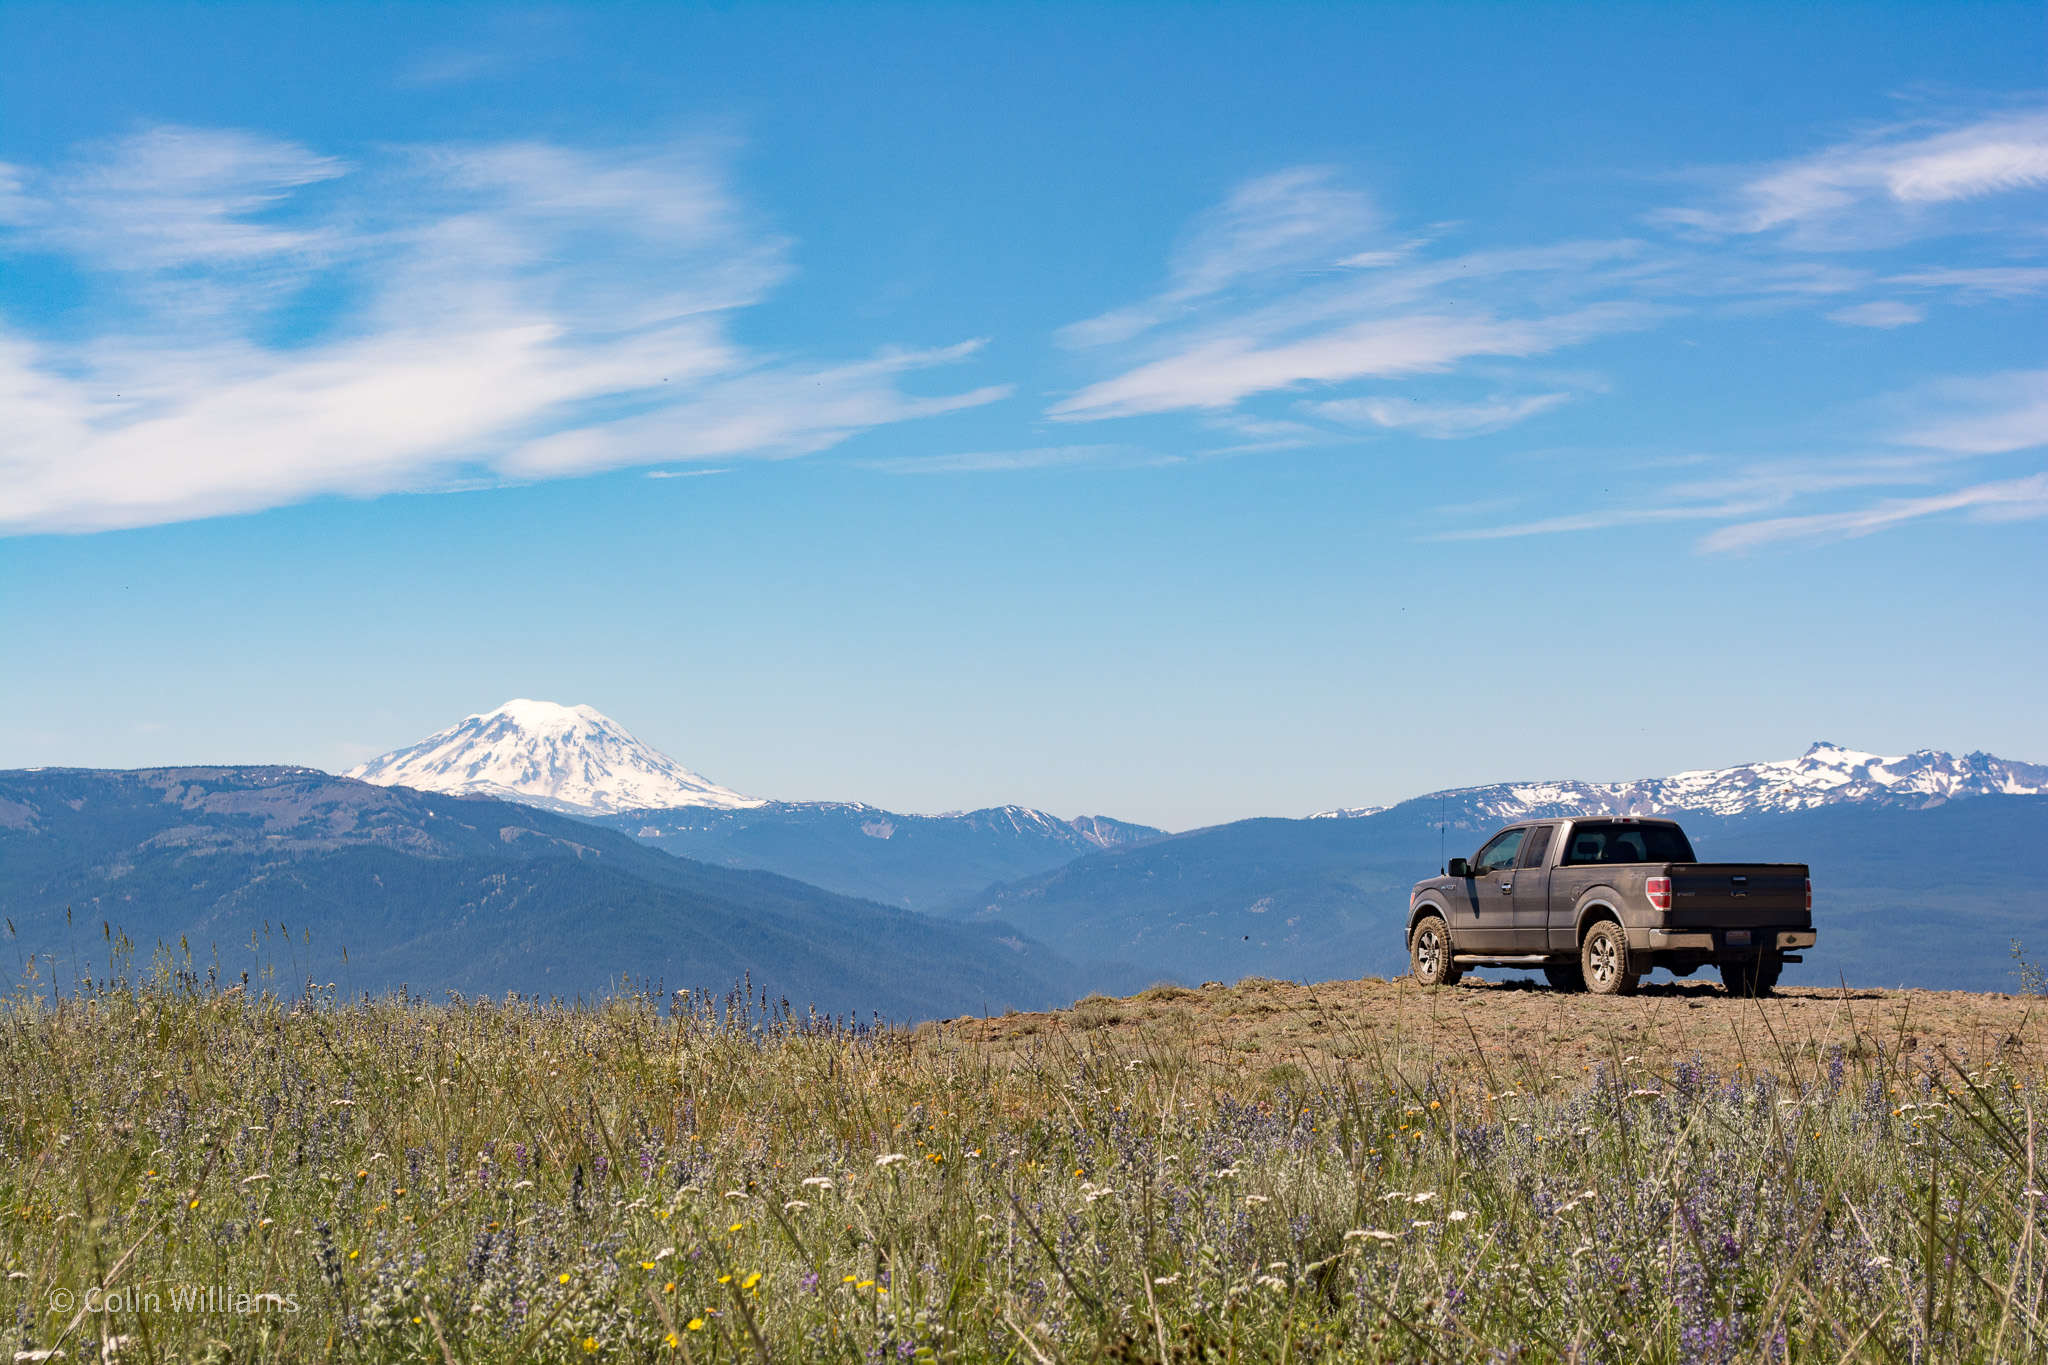 Pickup truck parked facing snow-capped mountain in the distance. Wildflowers in the immediate foreground.